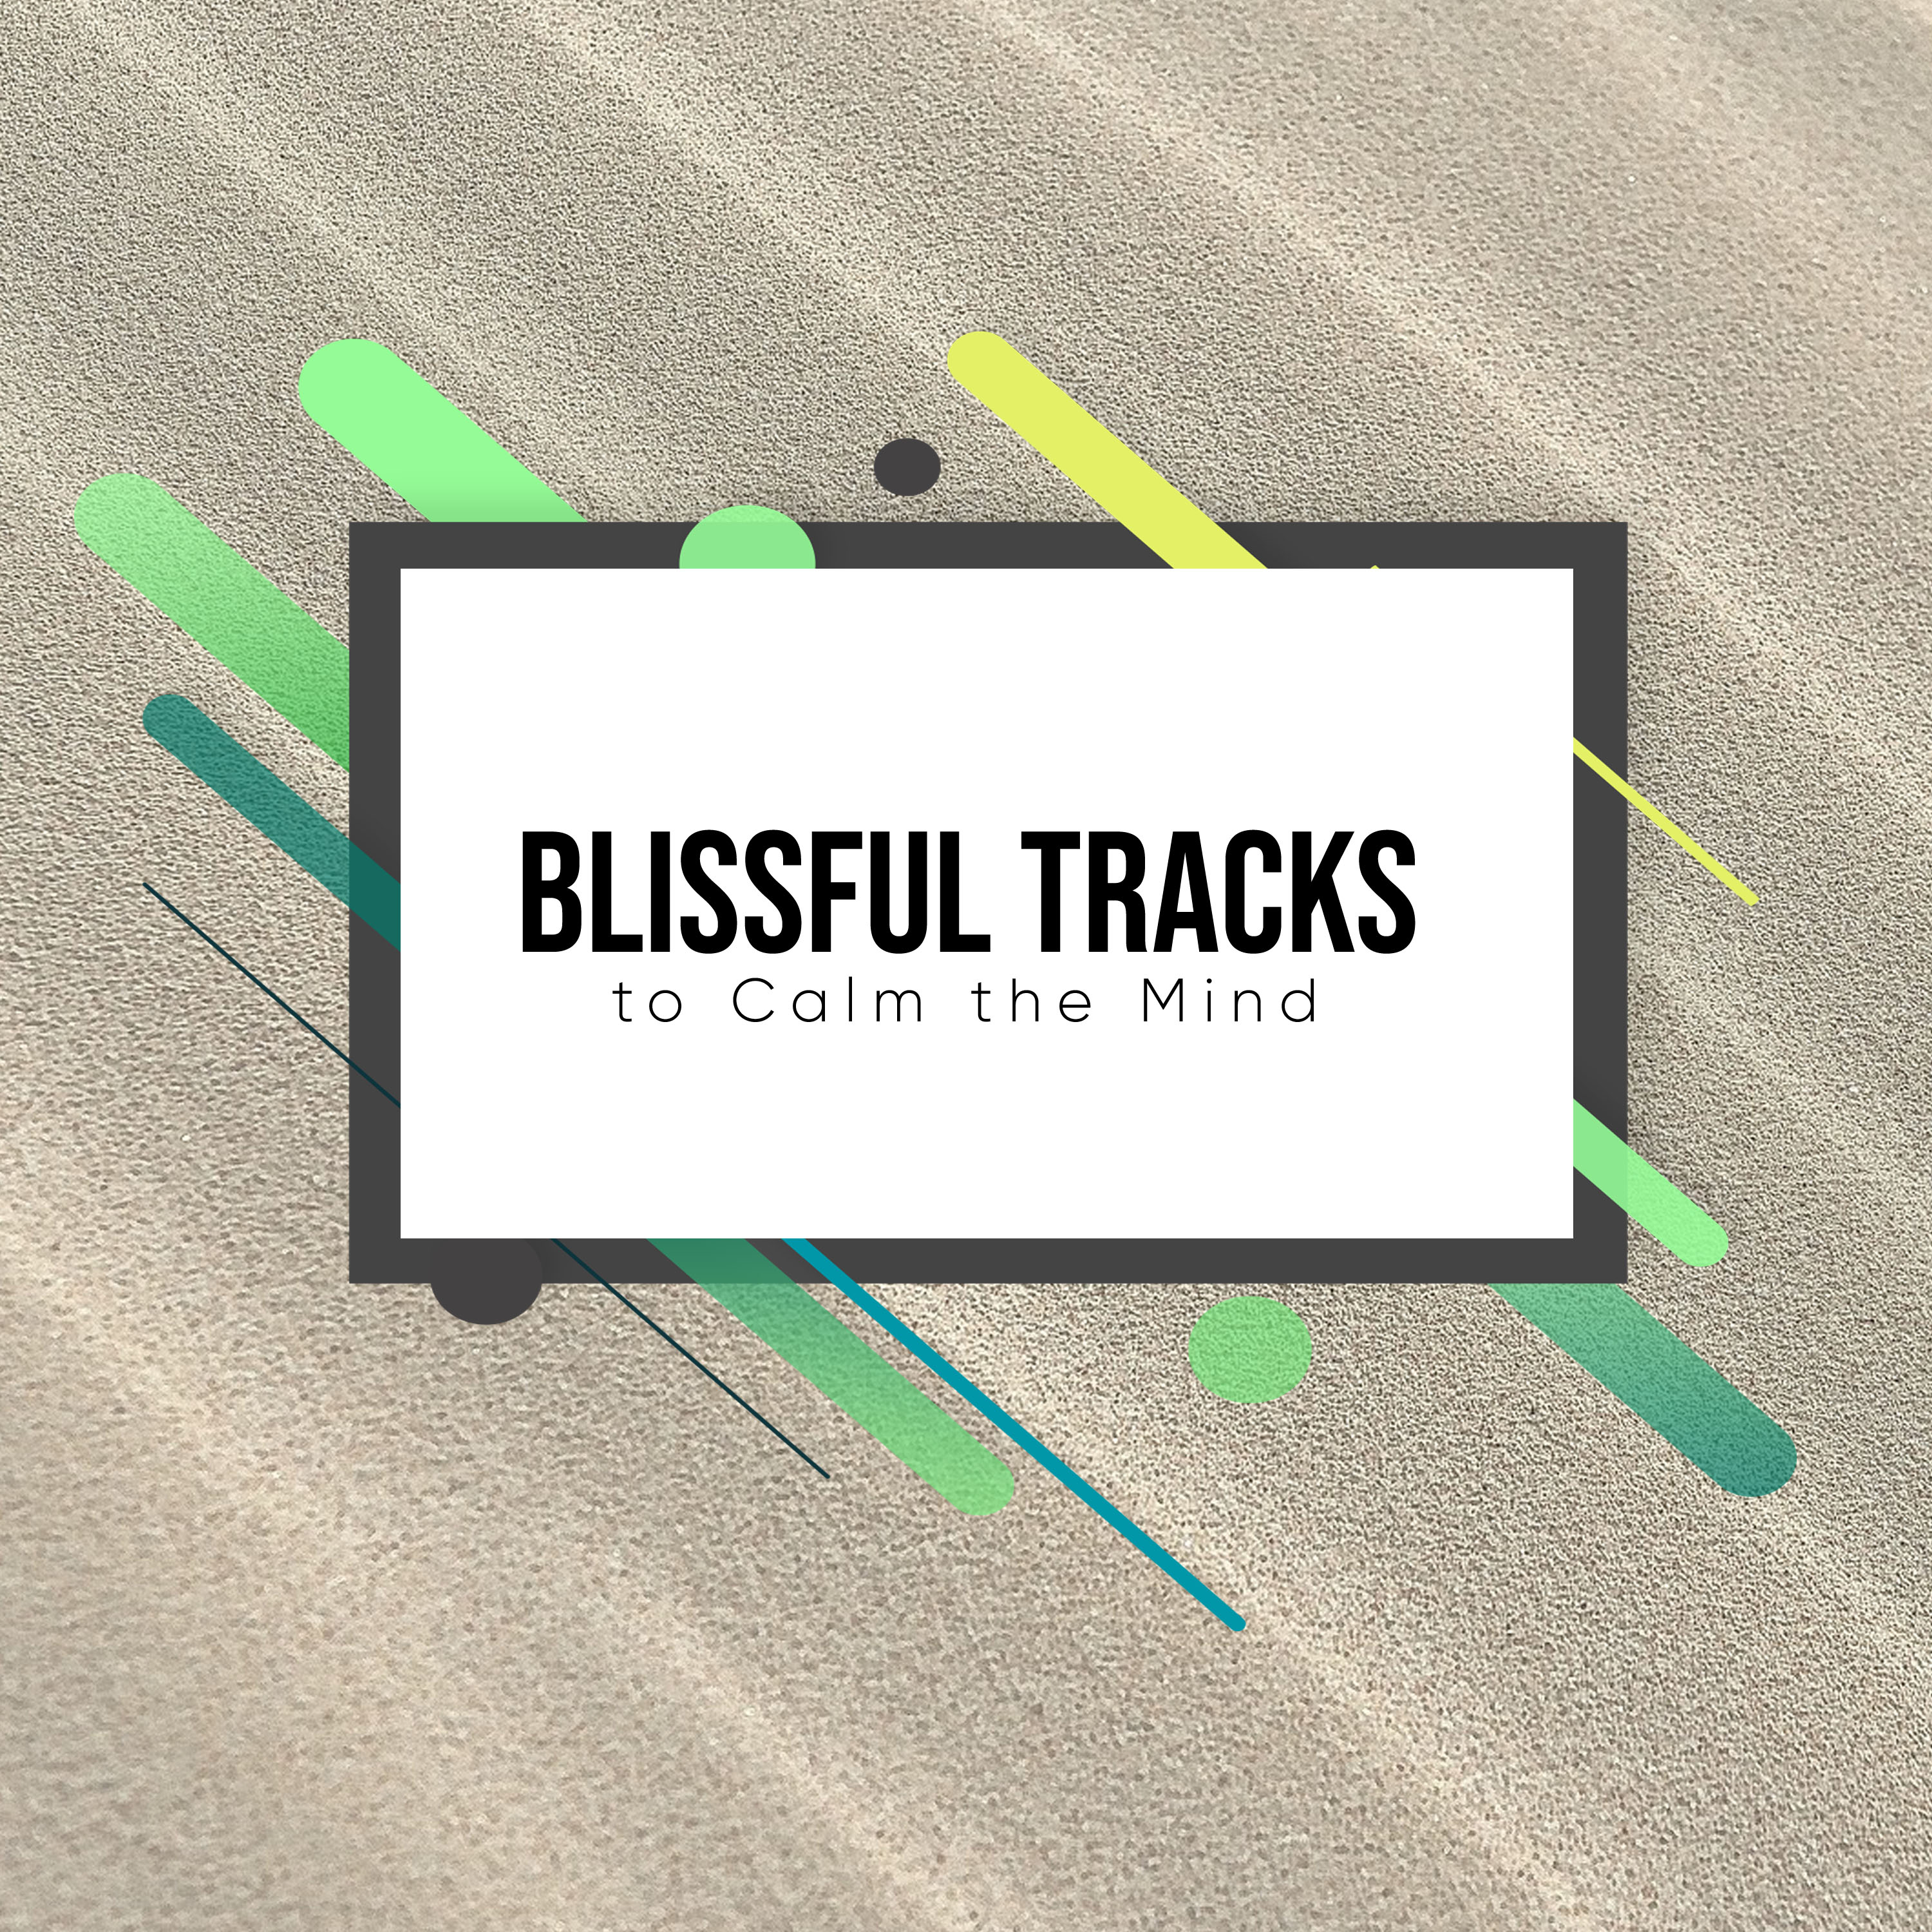 17 Blissful Tracks to Calm the Mind